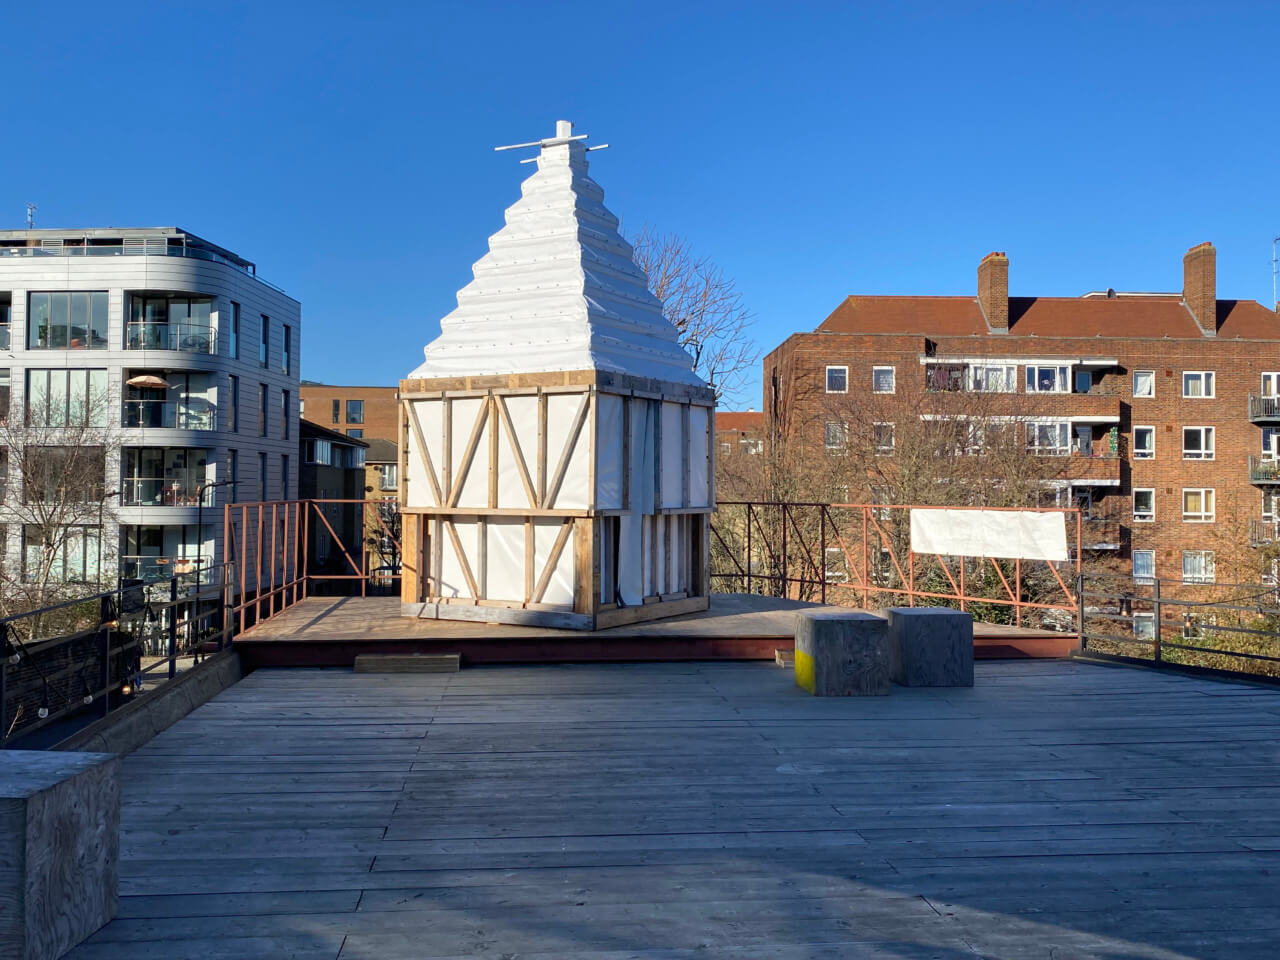 a plain white pyramid on a roof for Antepavilion